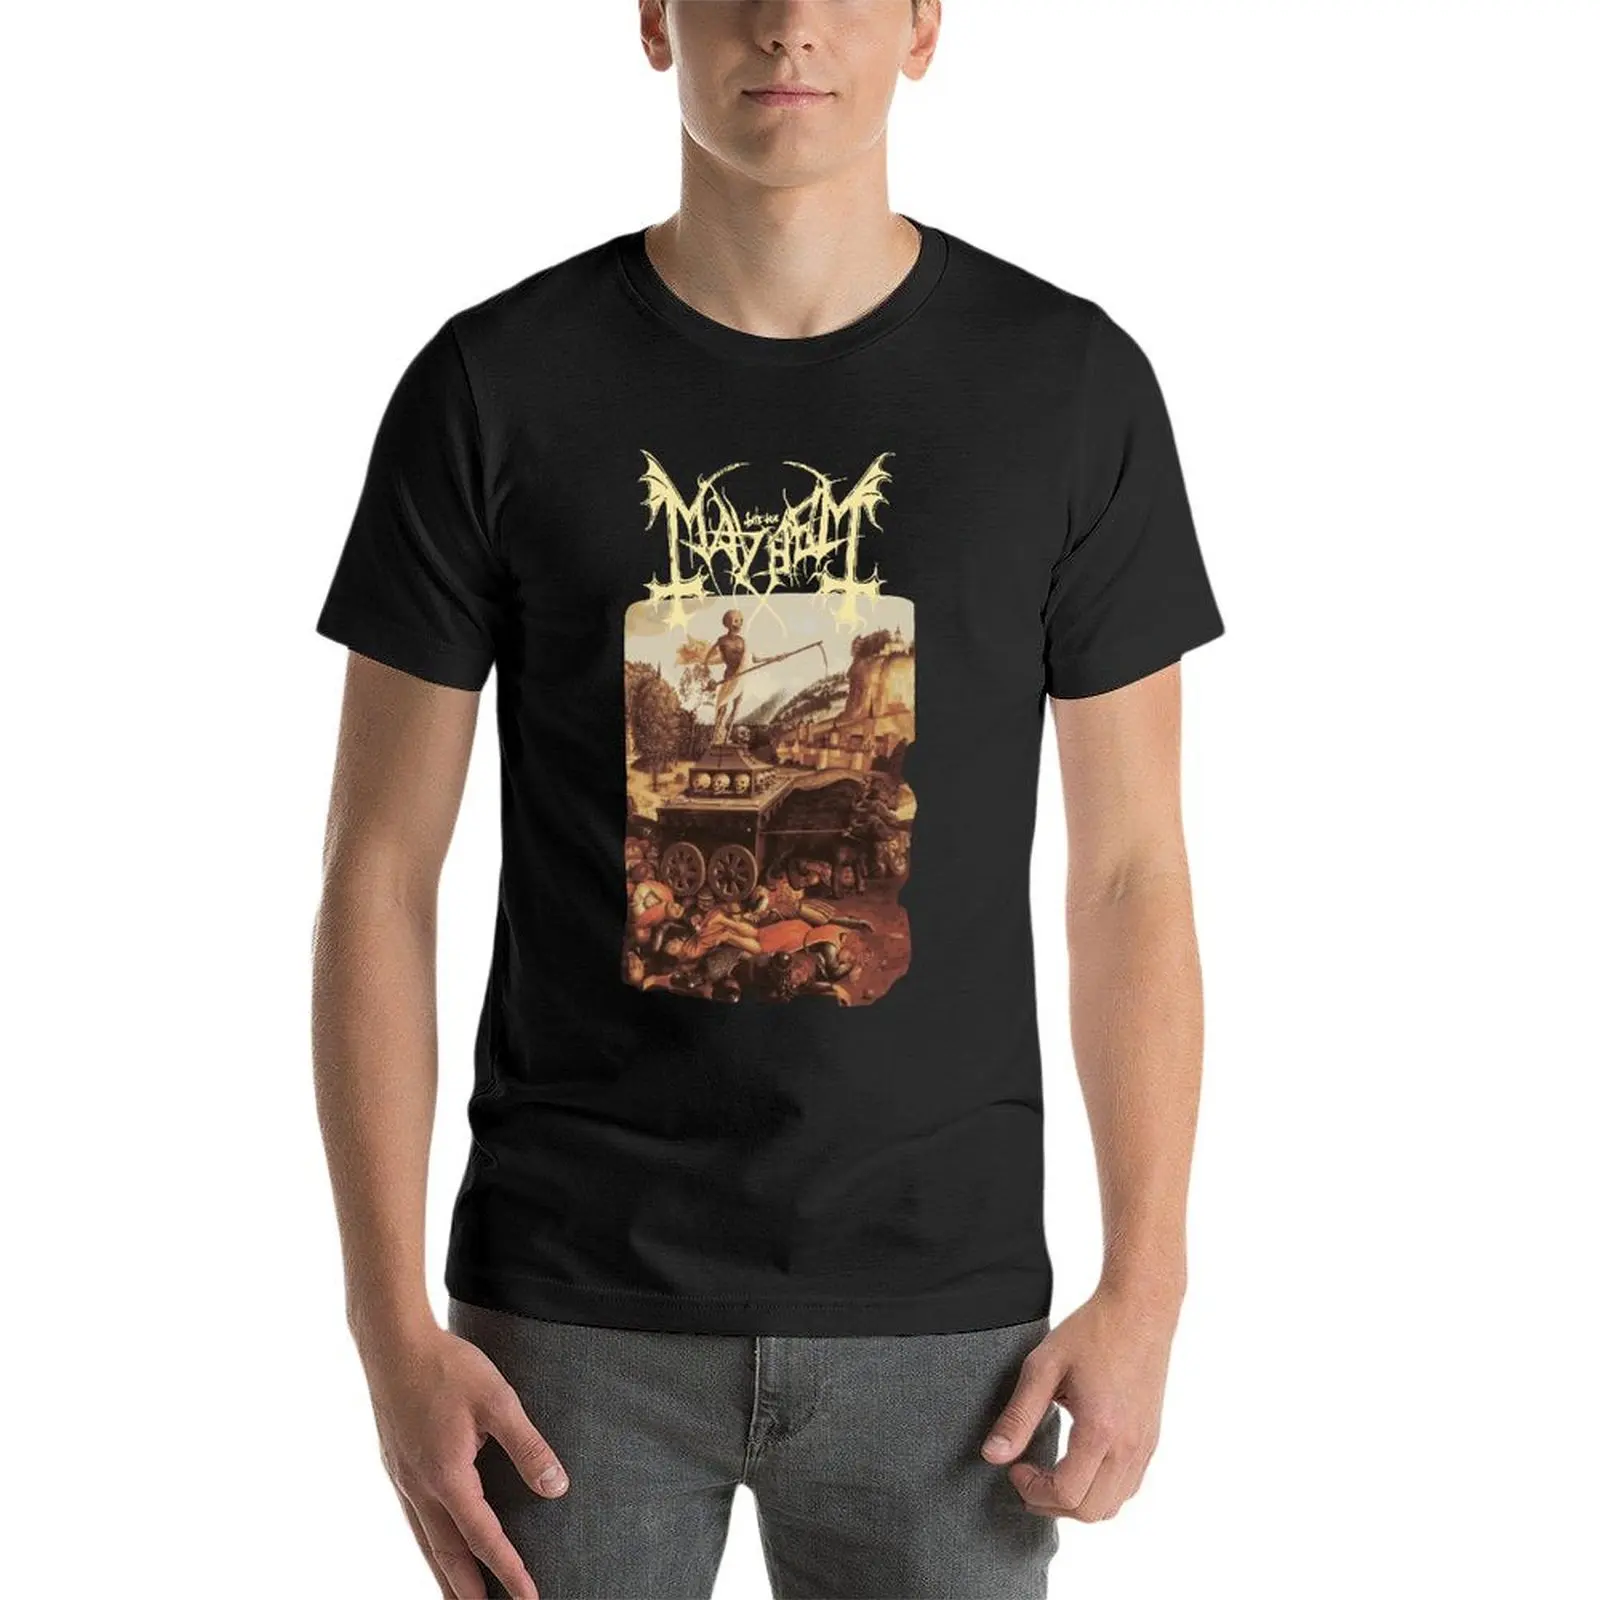 Mayhem Death Metal Band Oversize T Shirt Personalized Mens Clothes Short Sleeve Streetwear Big Size Tops Tee